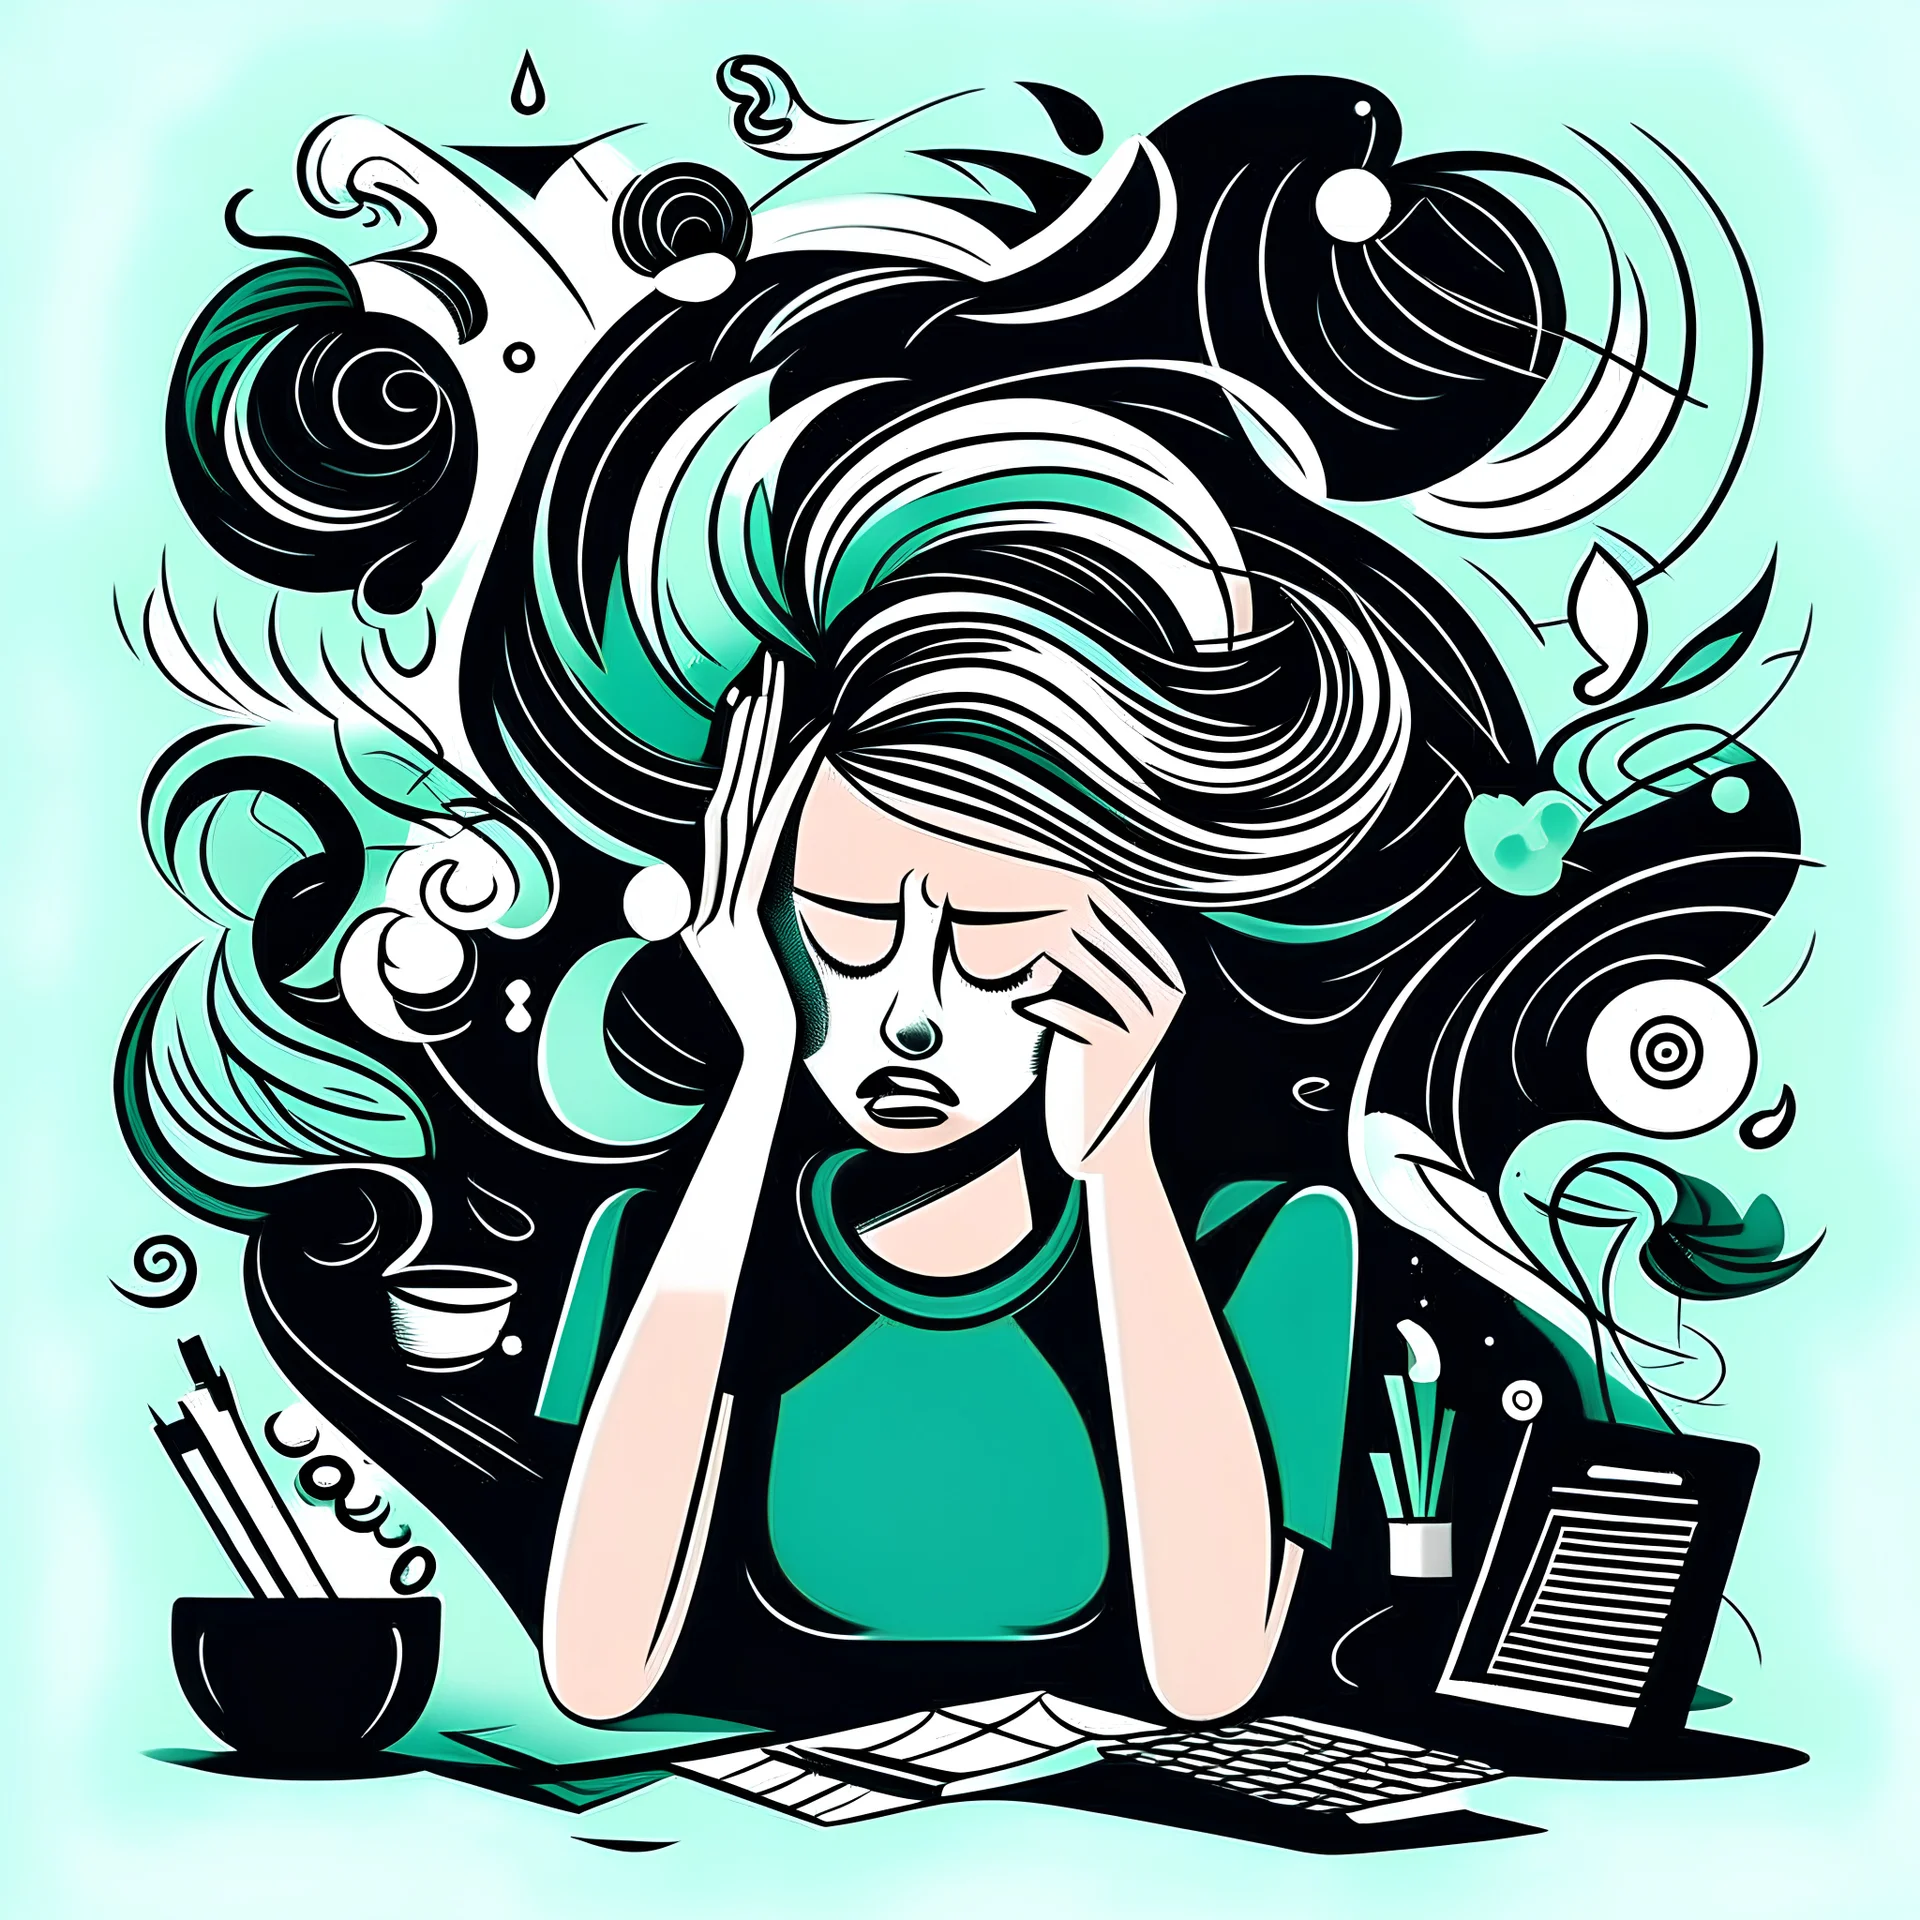 concept of emotional stress, cartoon style, mint and black colors palette, in the style of simplified and stylized illustrations, high resolution vector